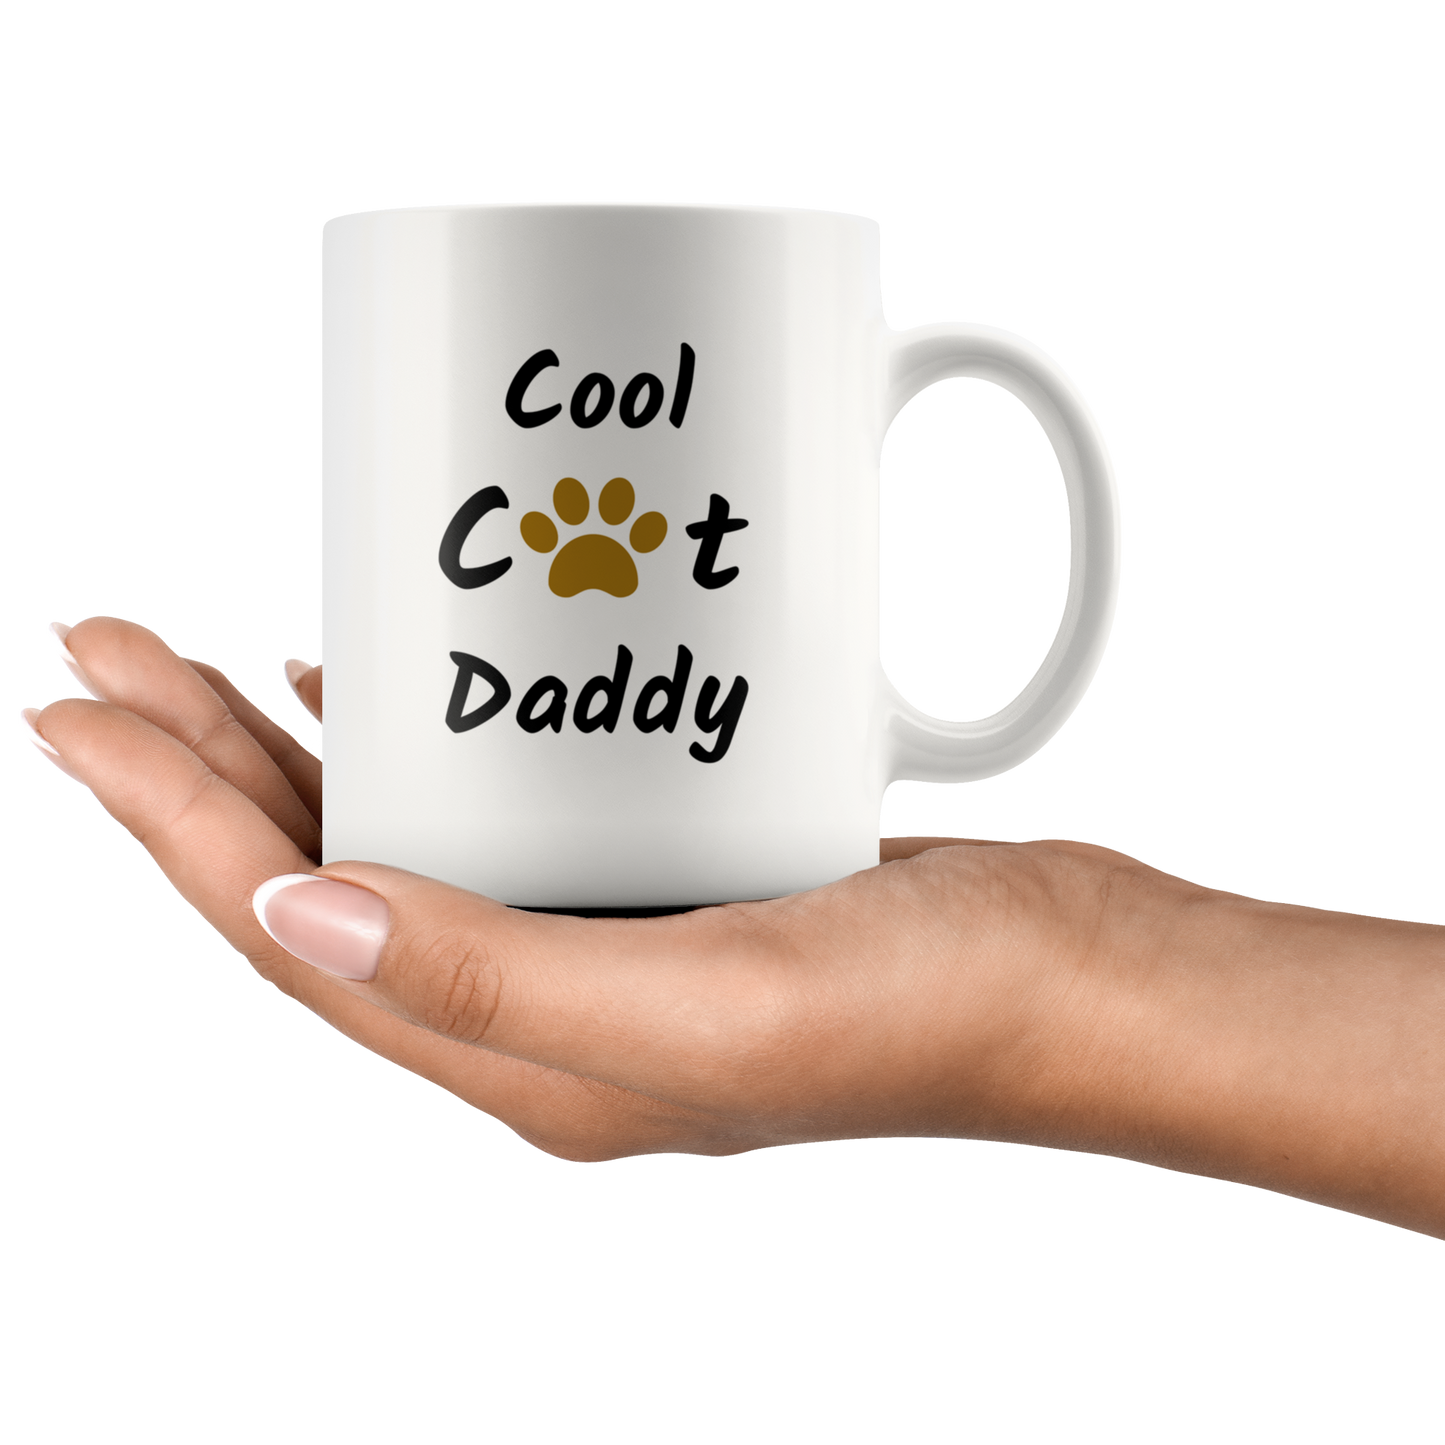 Cool Cat Daddy Coffee Mug Gift for Him Cat Dad Daddy Cat Mug Cat Gift Cat Lover Gift Funny Mug